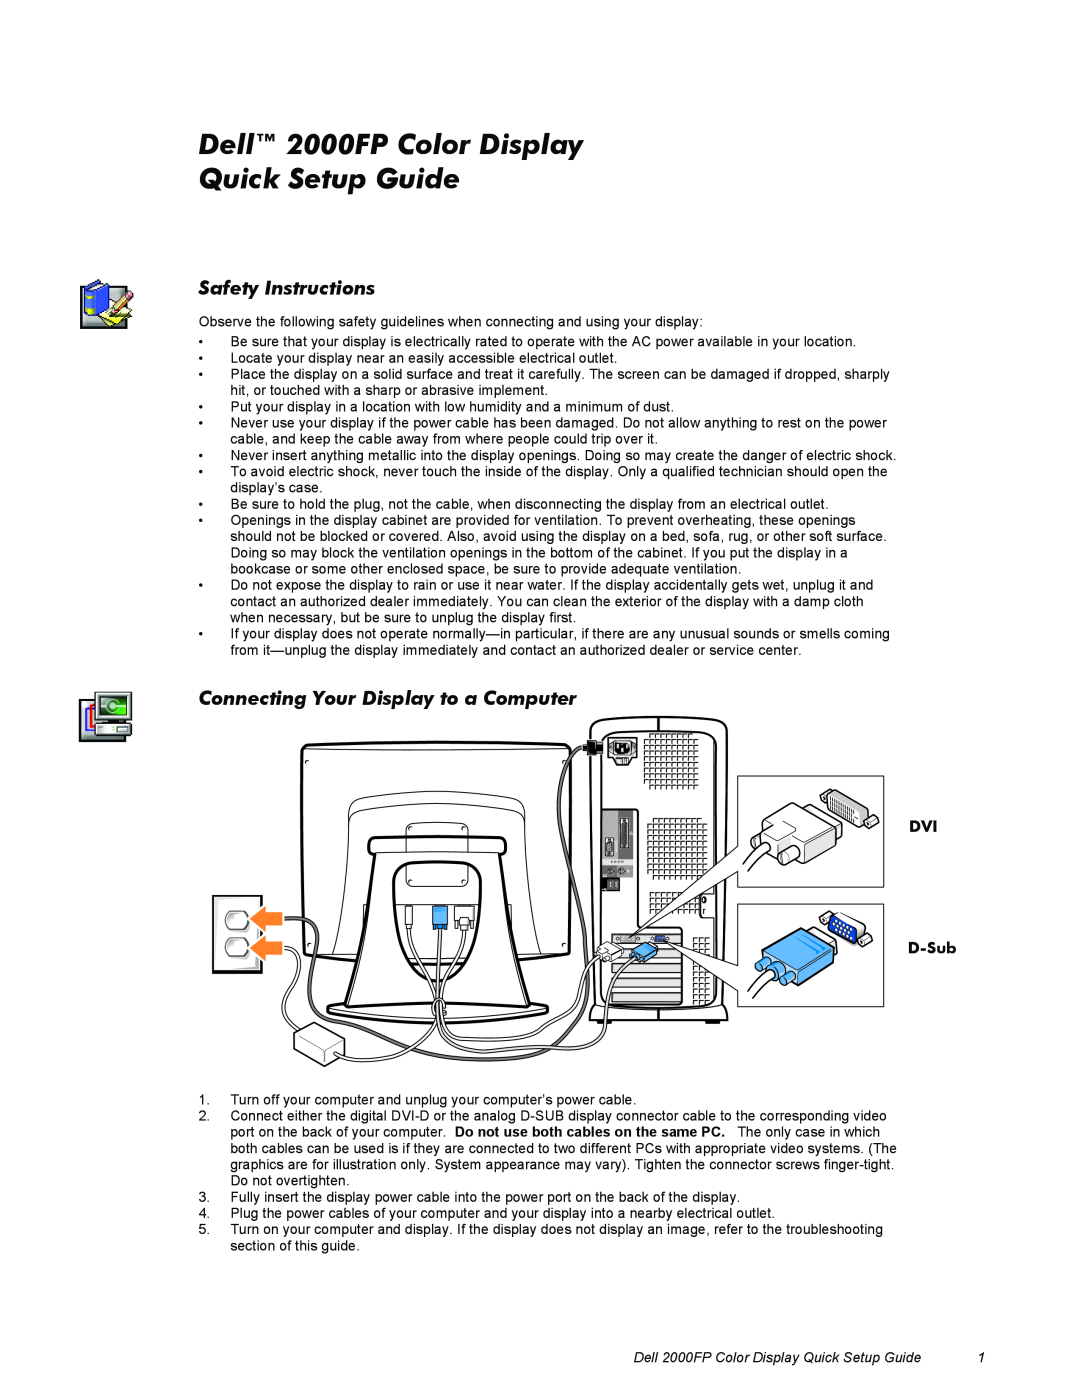 Dell 2000FP setup guide Safety Instructions, Connecting Your Display to a Computer, DVI D-Sub 